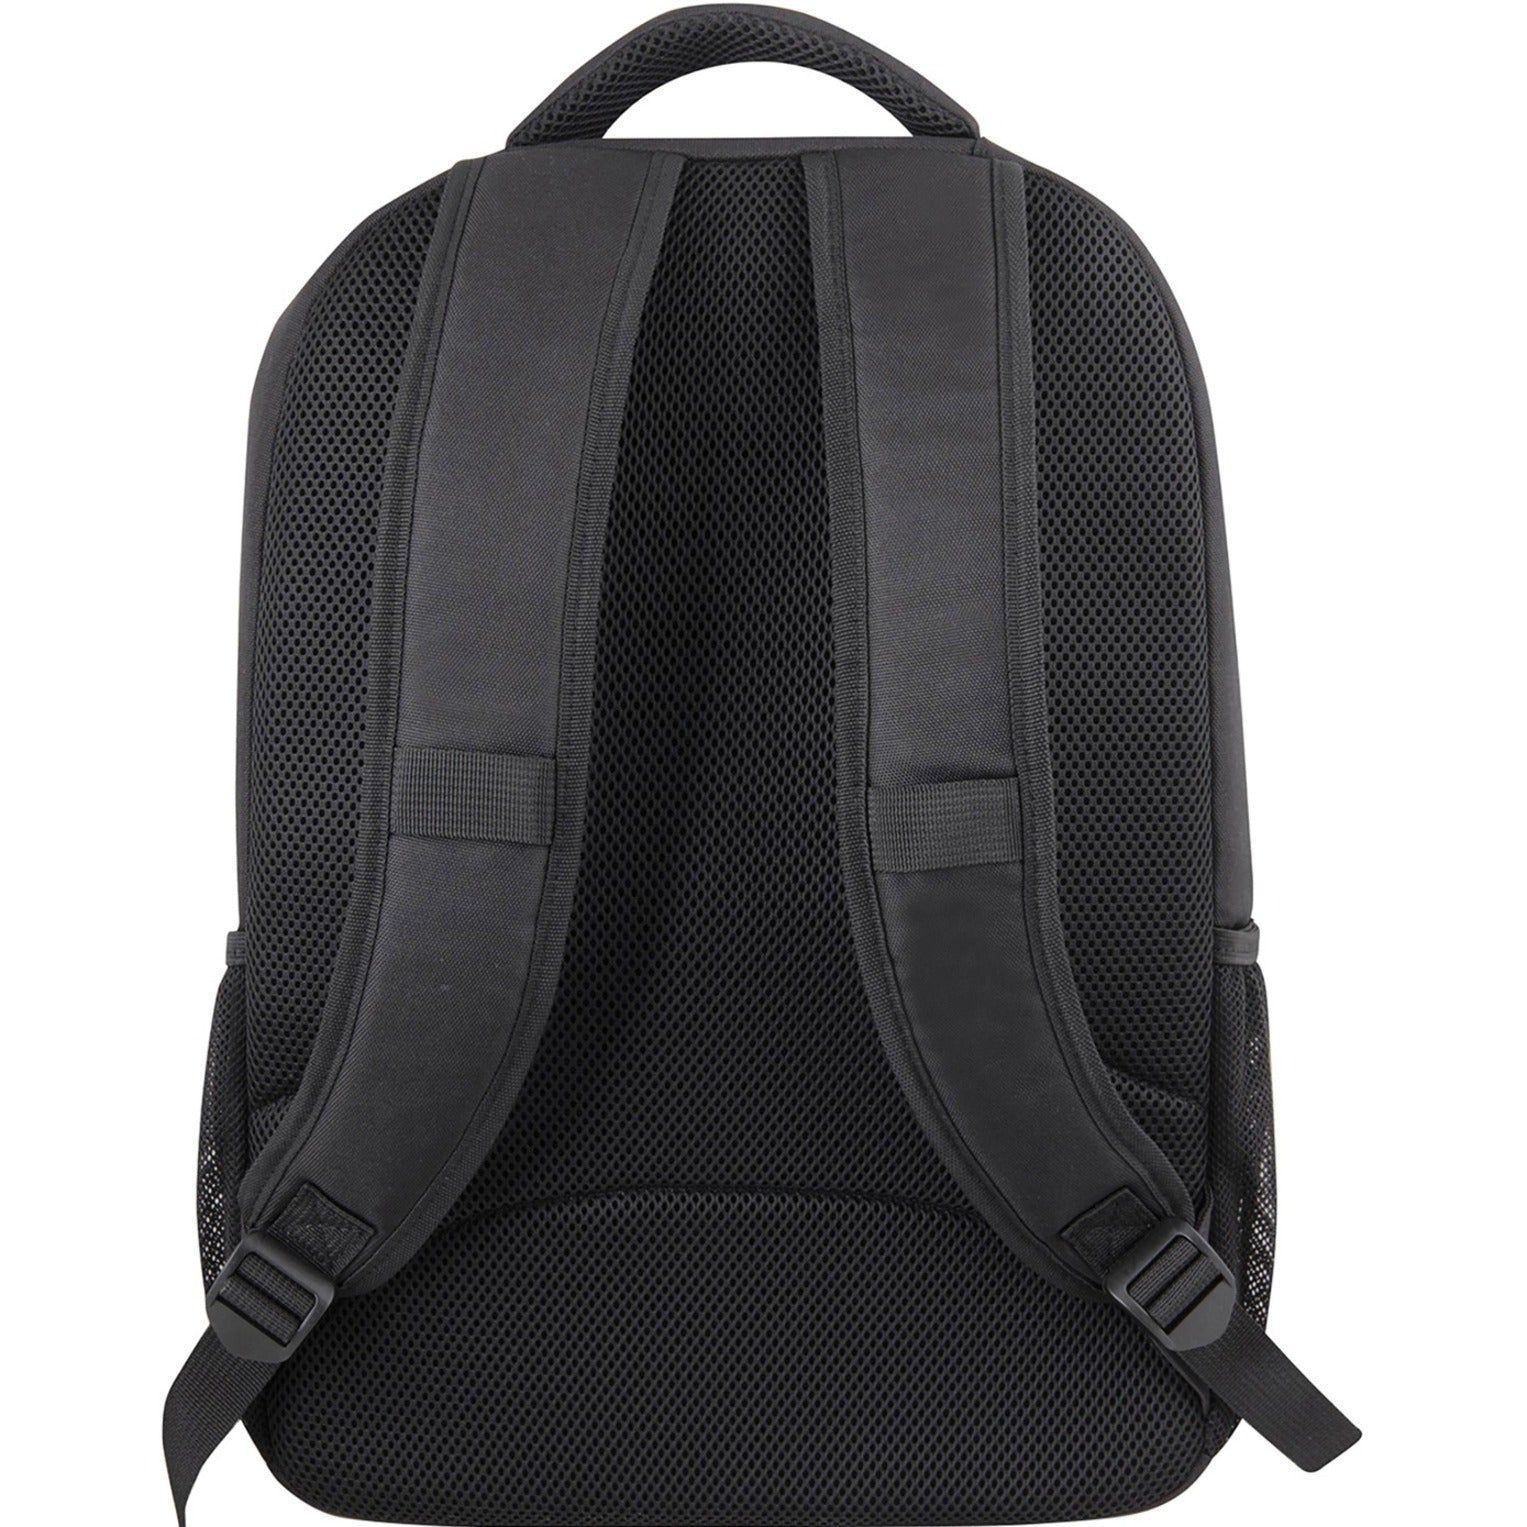 Urban Factory ECB14UF CYCLEE Eco Laptop Backpack (14.1-In.), Black, Lightweight and Durable Carrying Case for Notebook, Tablet, and Accessories